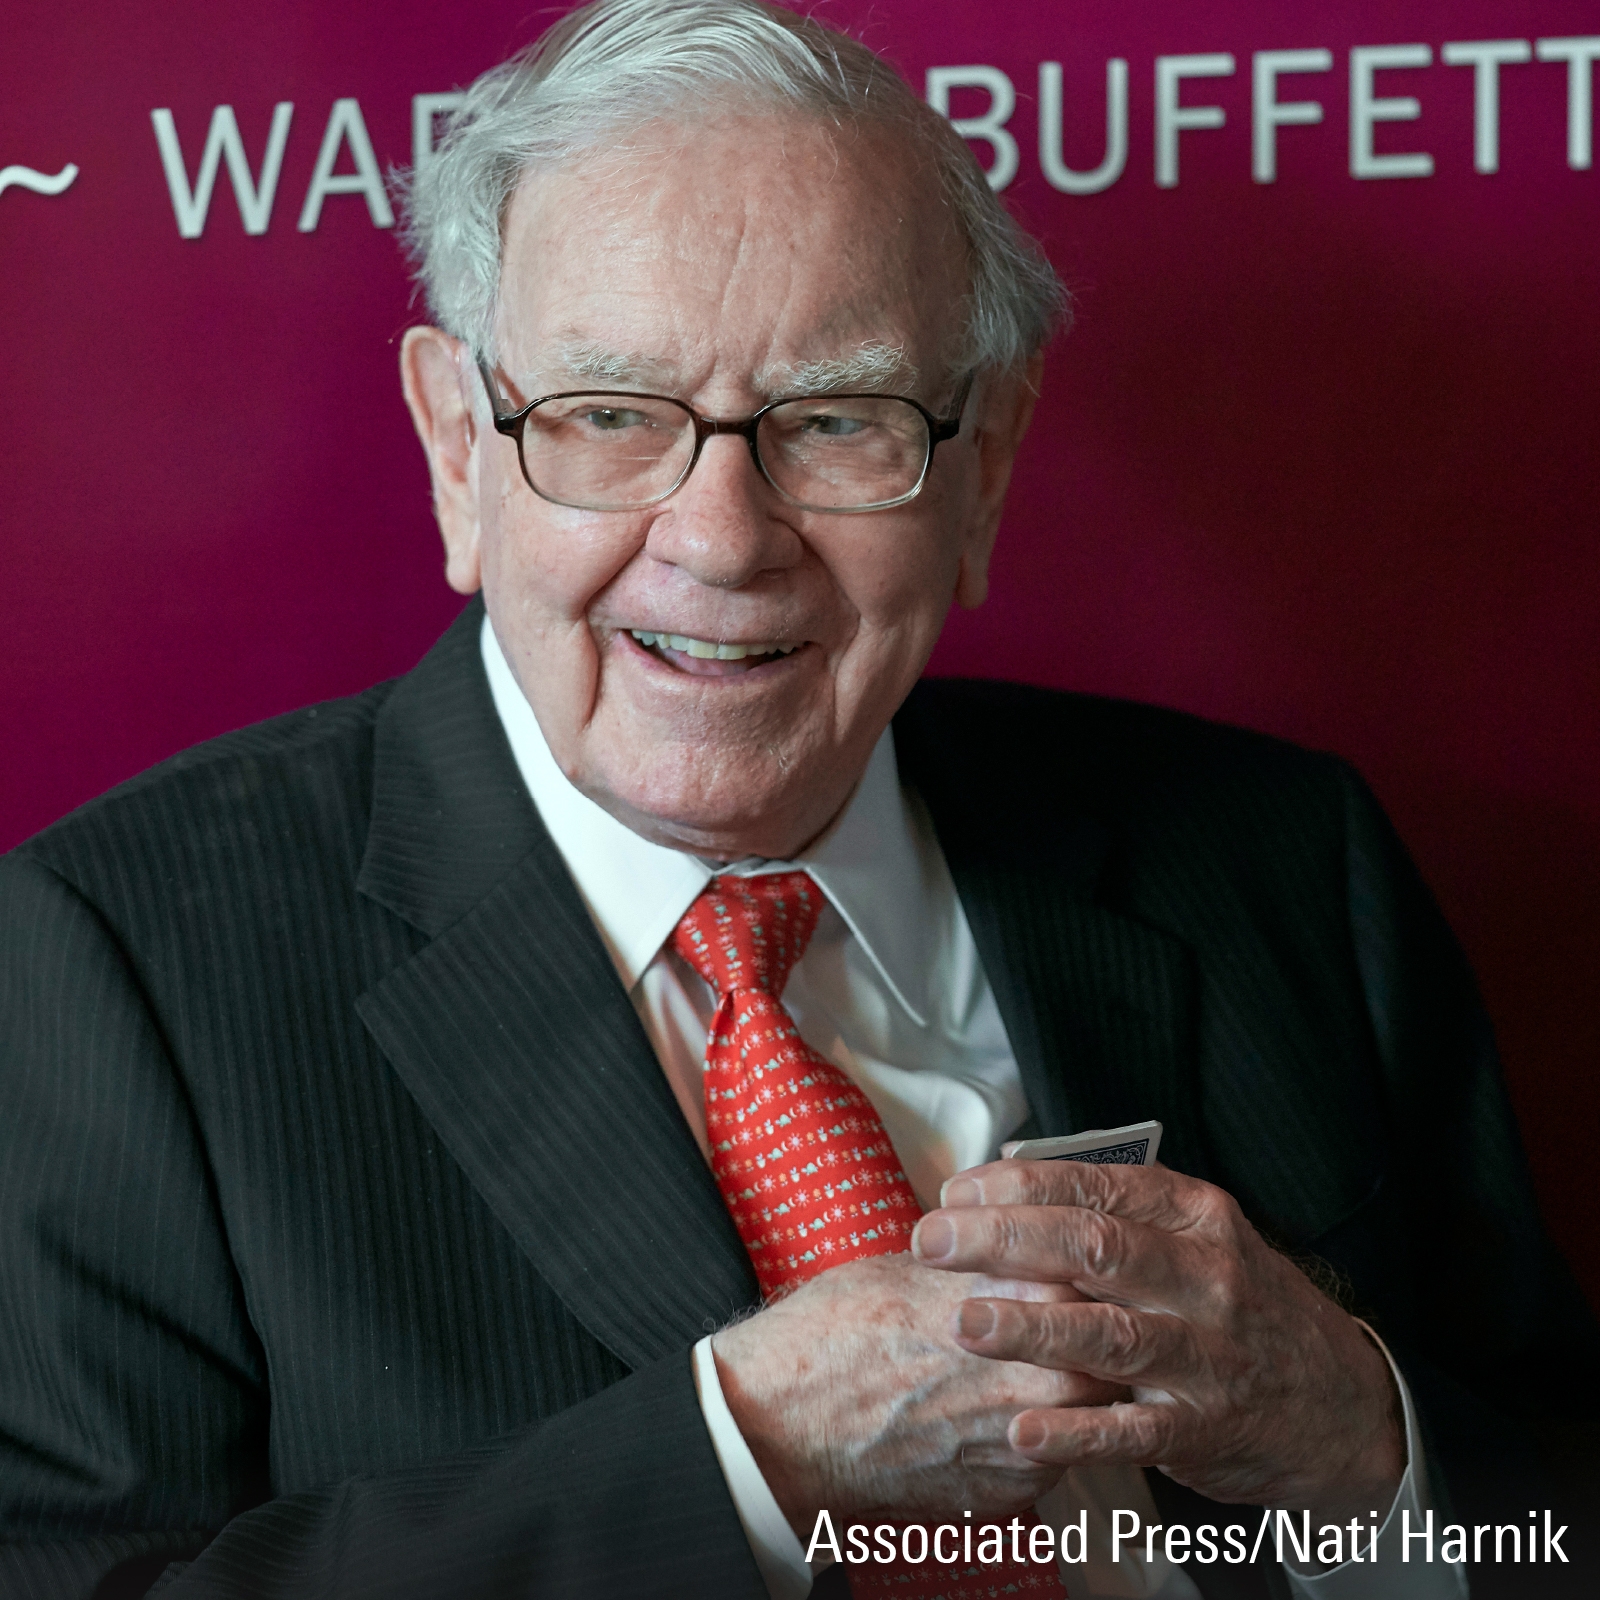 Warren Buffett on Charlie Munger, Realistic Investment Expectations, and the Stocks He Won’t Sell